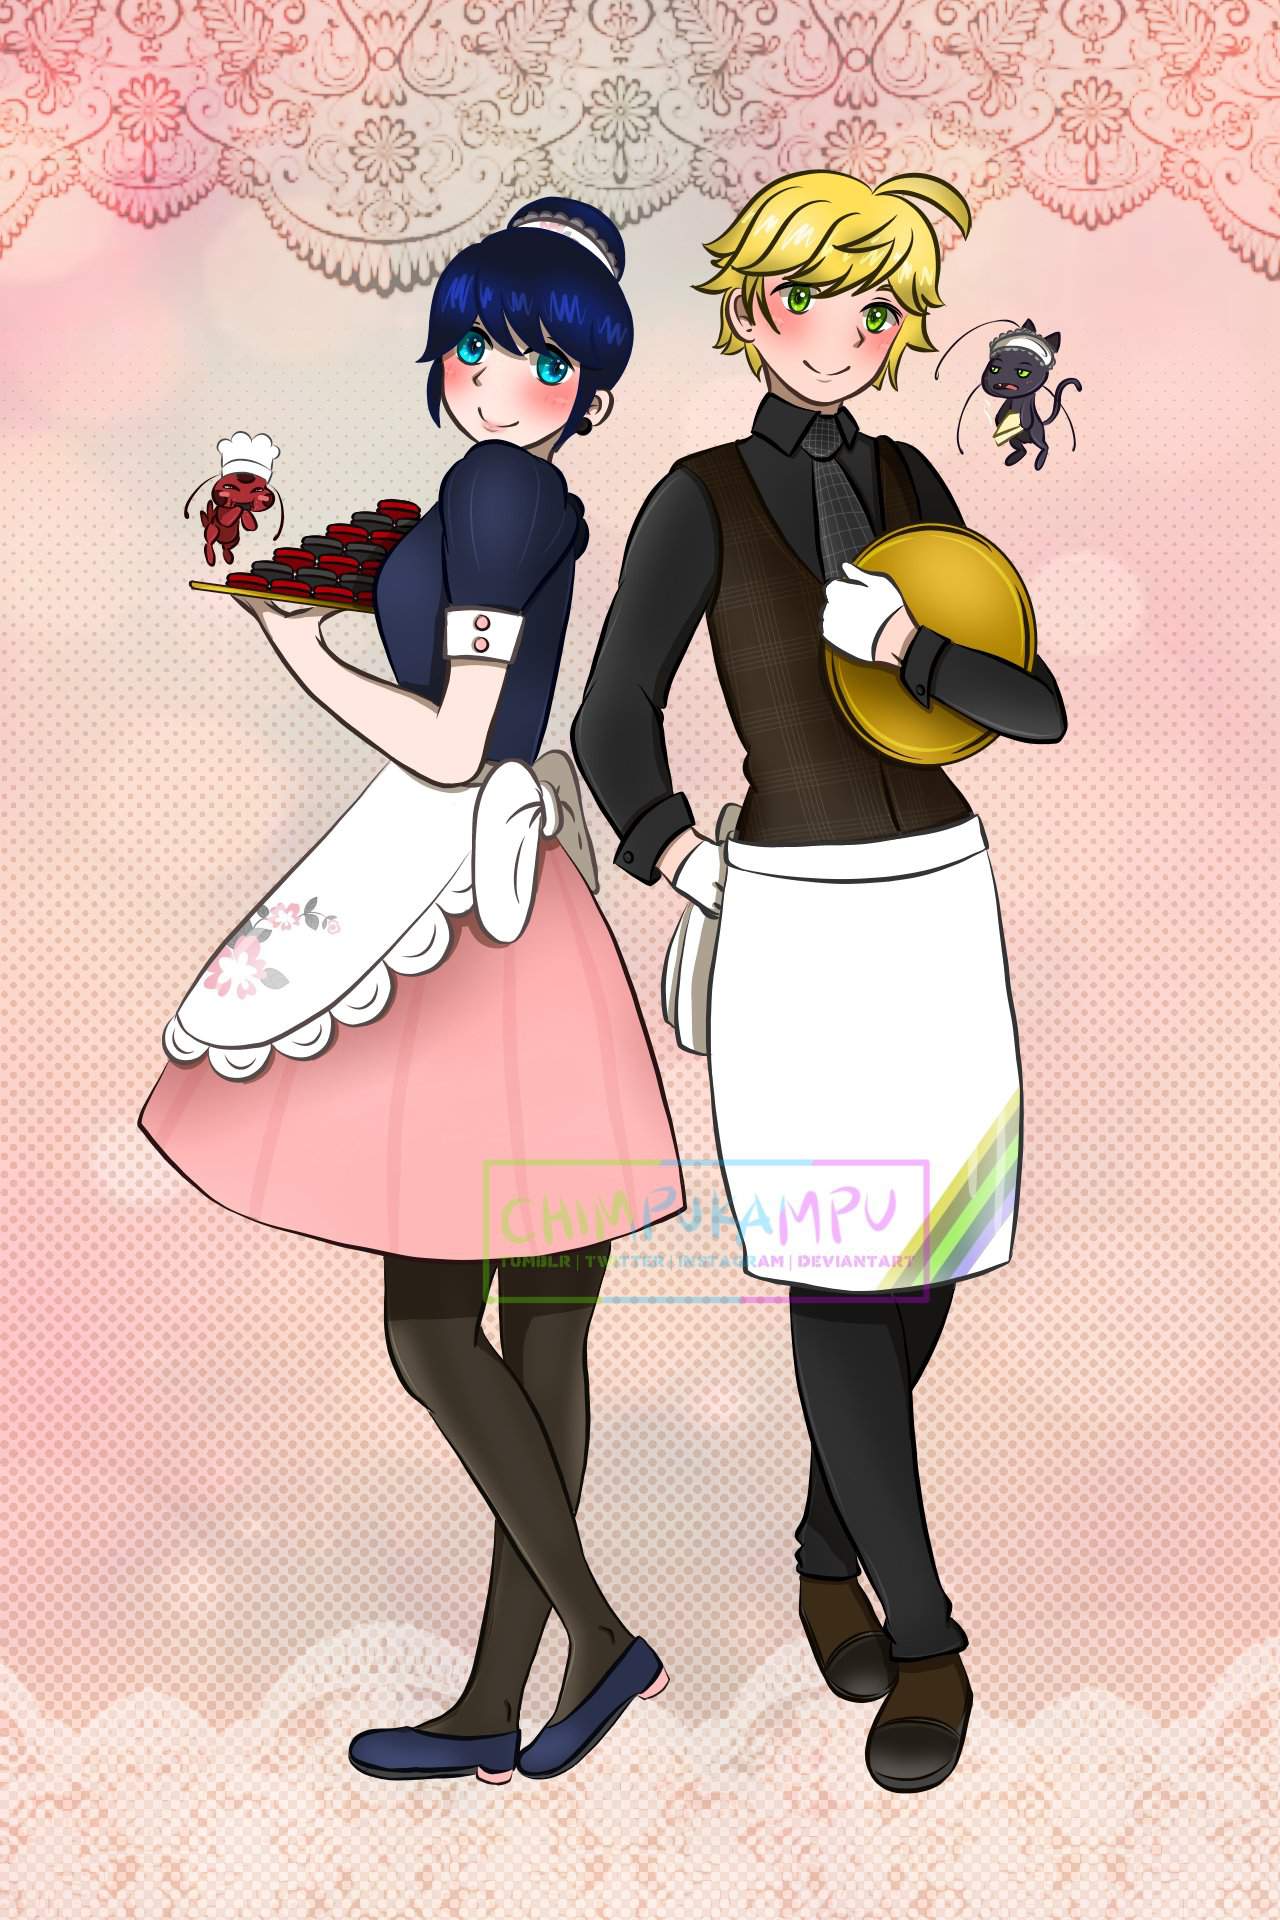 Maid!Marinette and Butler!Adrien | Miraculous Amino